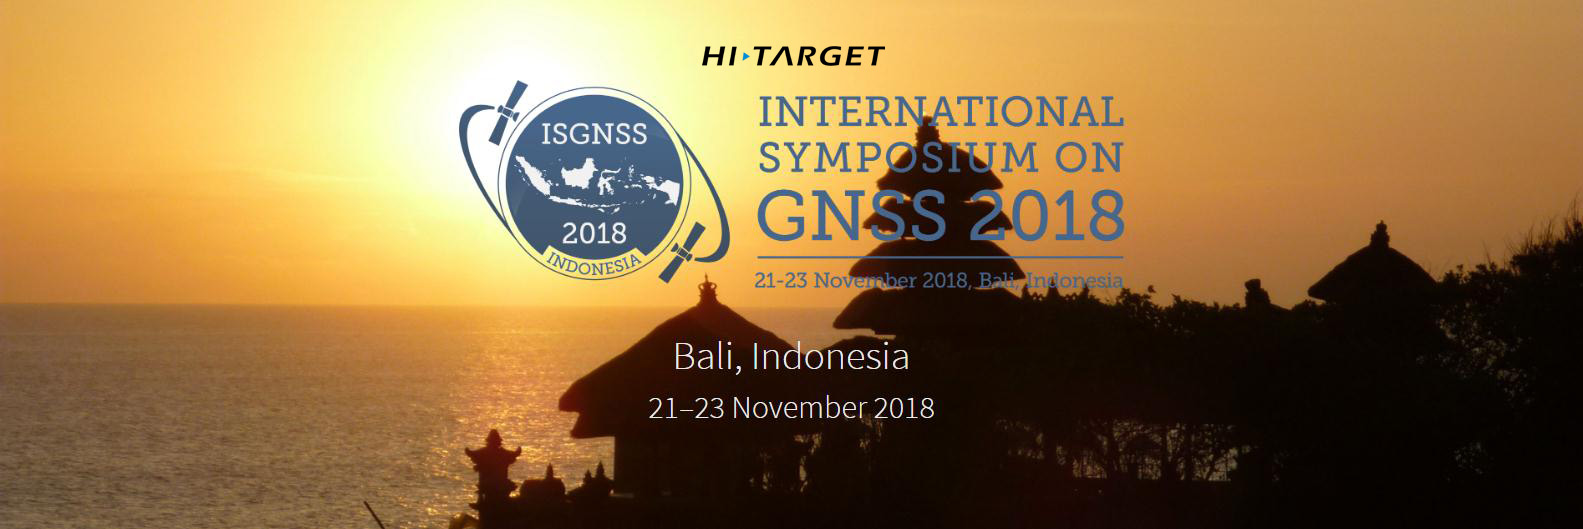 20181116040750398 - ISGNSS 2018 Will Take Place in Bali